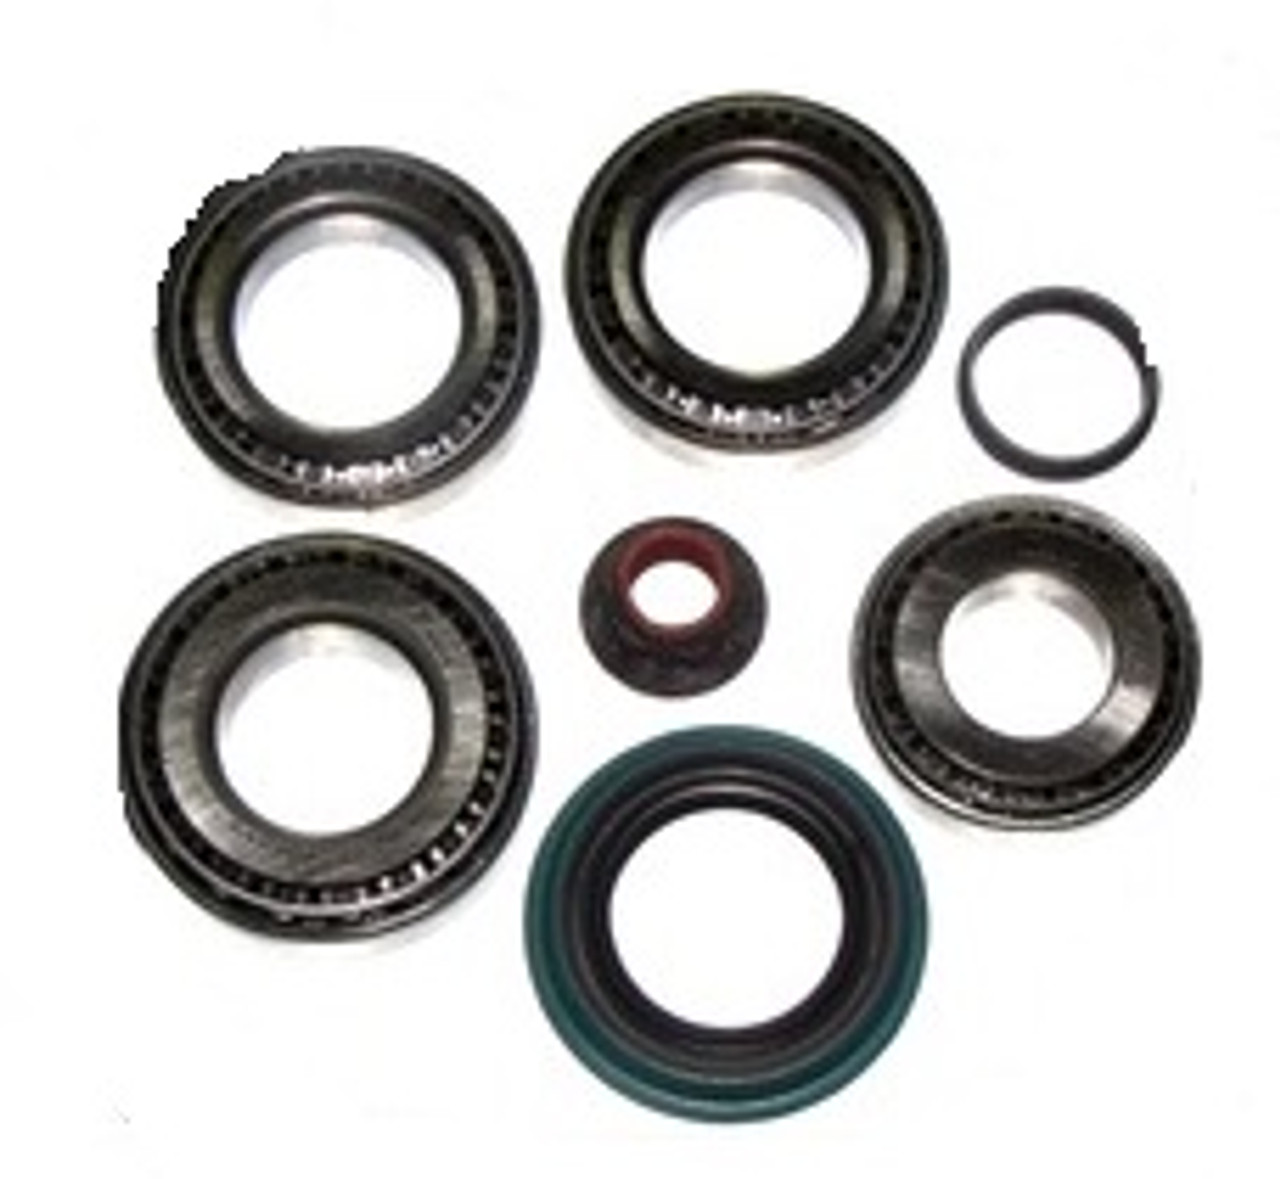 FORD 8.8 REAR DIFFERENTIAL BEARING KIT FITS '92-'02 MUSTANG WITH STA4183  REAR BEARING Transmission Parts Distributors